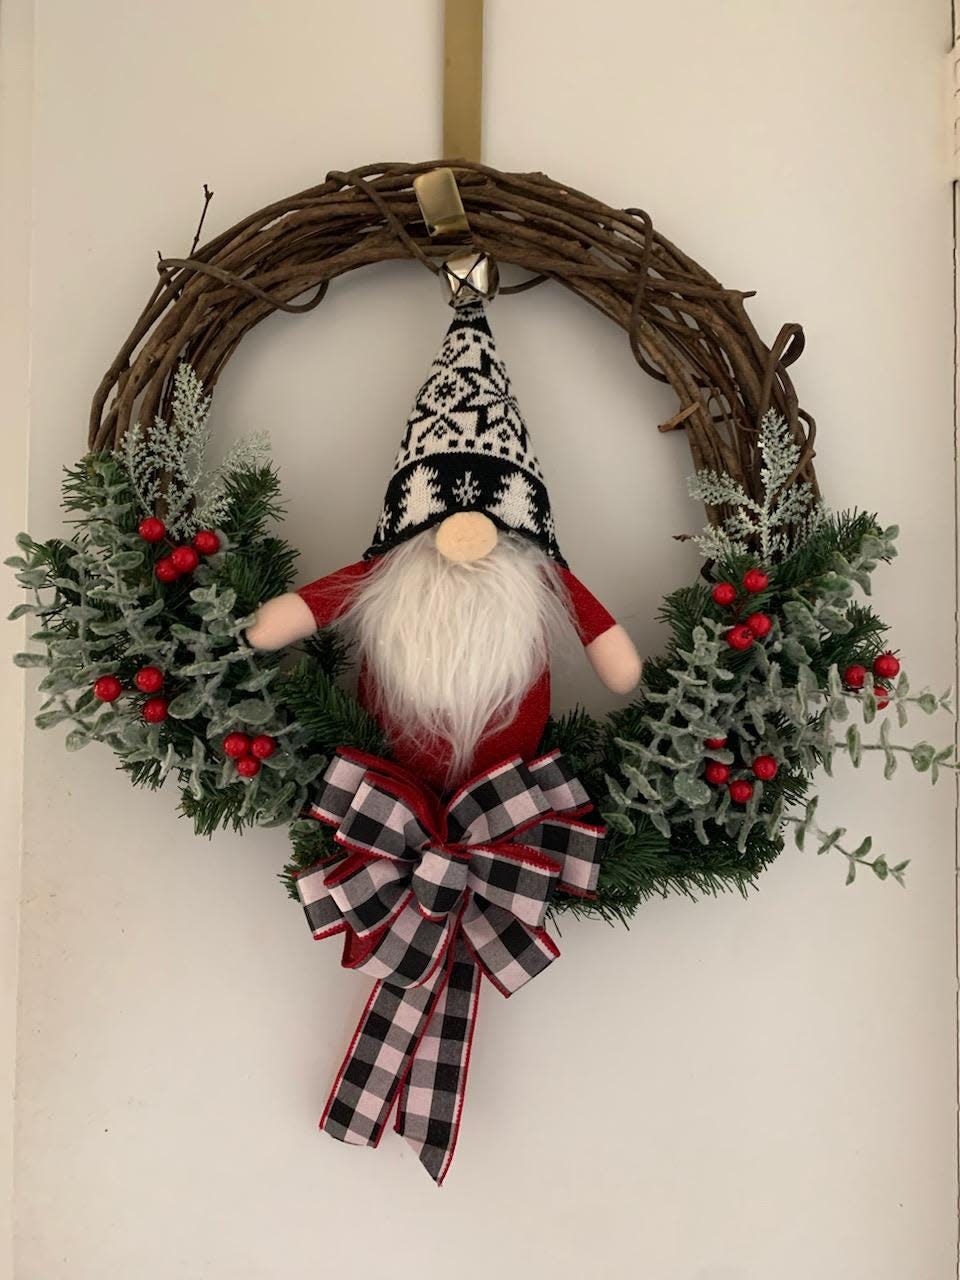 Wreath-maker Mary Beth Kelly is one of the crafters at the 2023 Christmas arts and crafts fair at B.M.C. Durfee High School in Fall River.